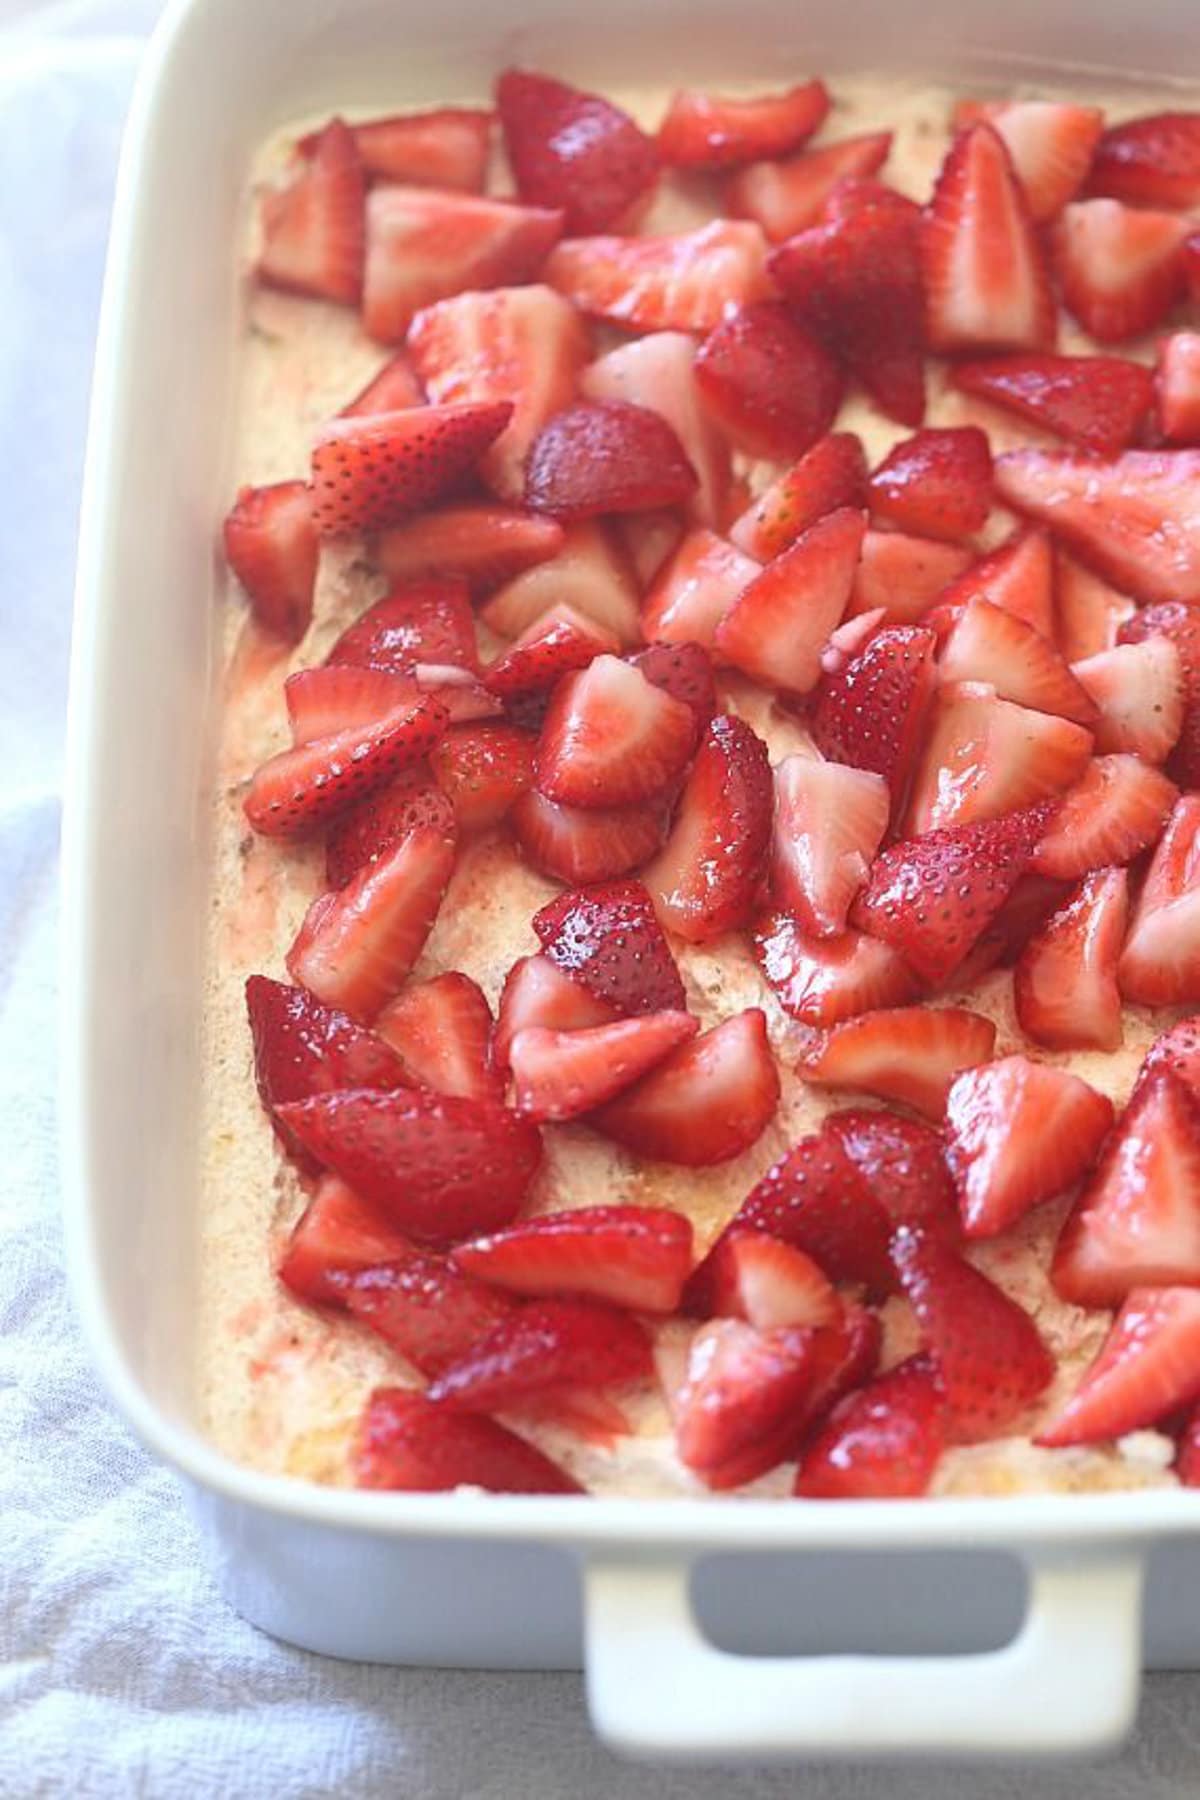 Chilled shortcake mix topped with strawberries